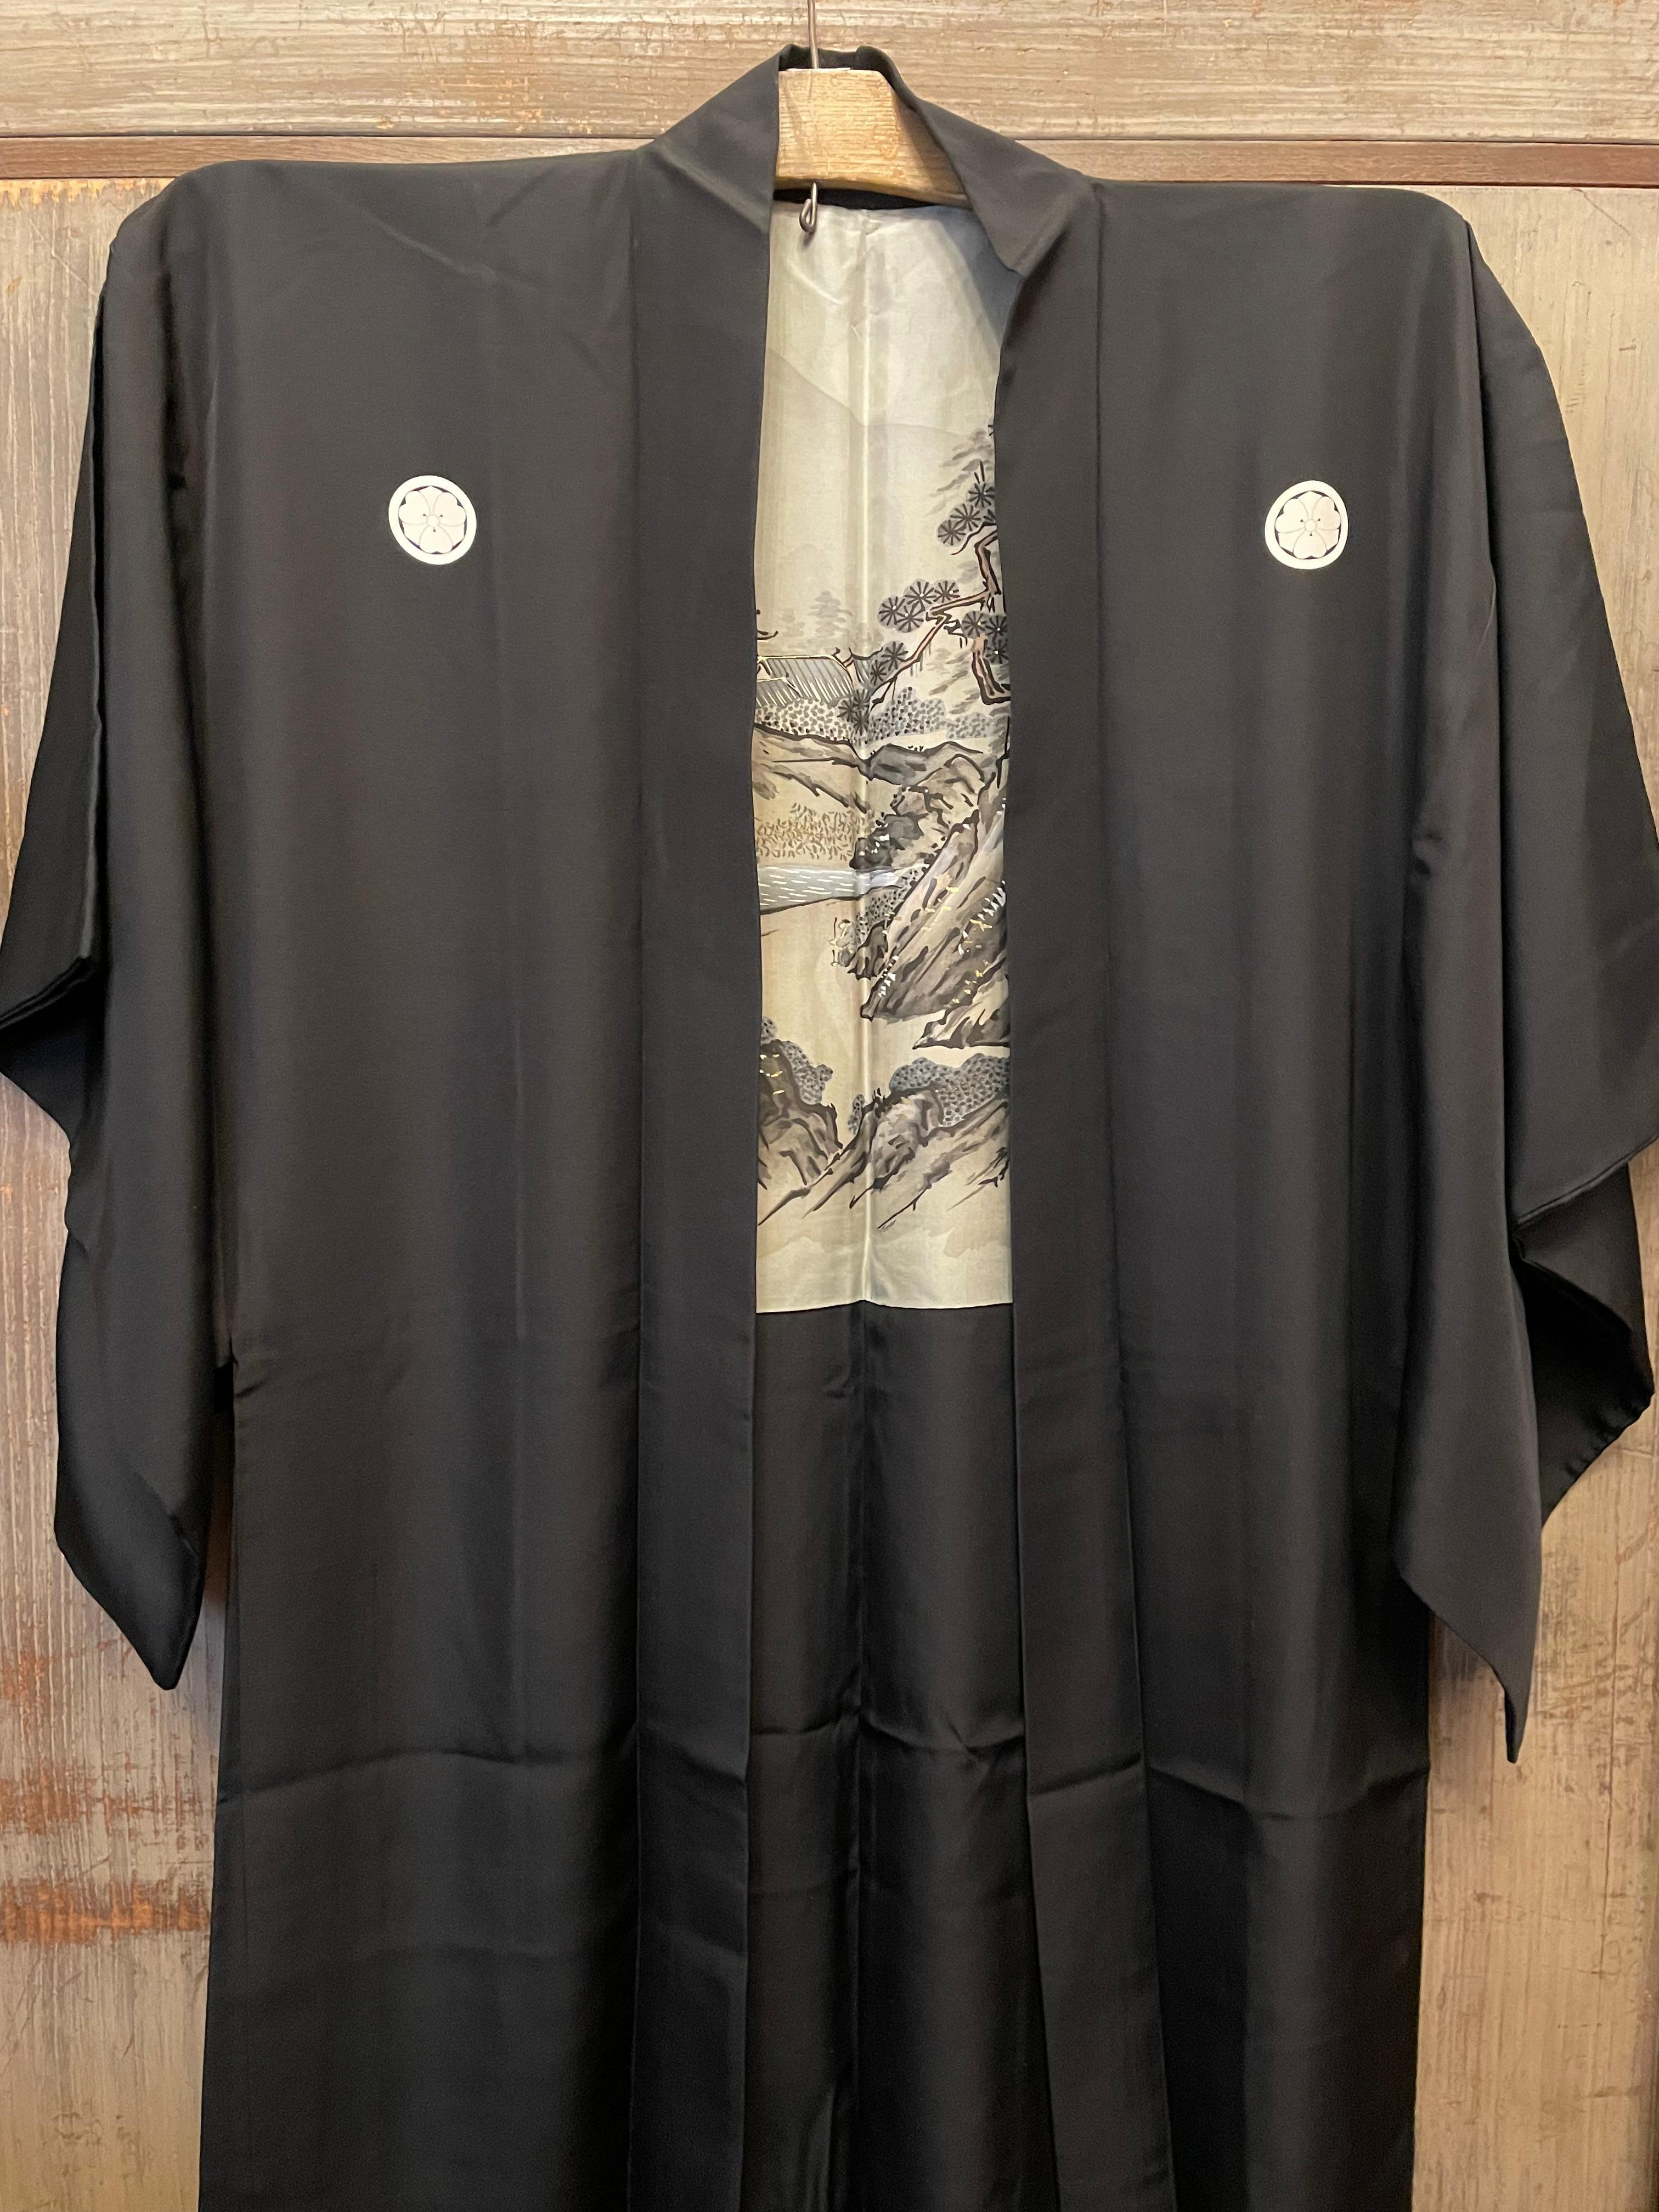 This is a Japanese Haori jacket for men made in 1960s (Showa era) and made with silk.
It is reversible. Inside of this haori, the design is with landscape, this design was drew by an artist 'Sesshu Toyo'. Outside is with family crest. 
The family